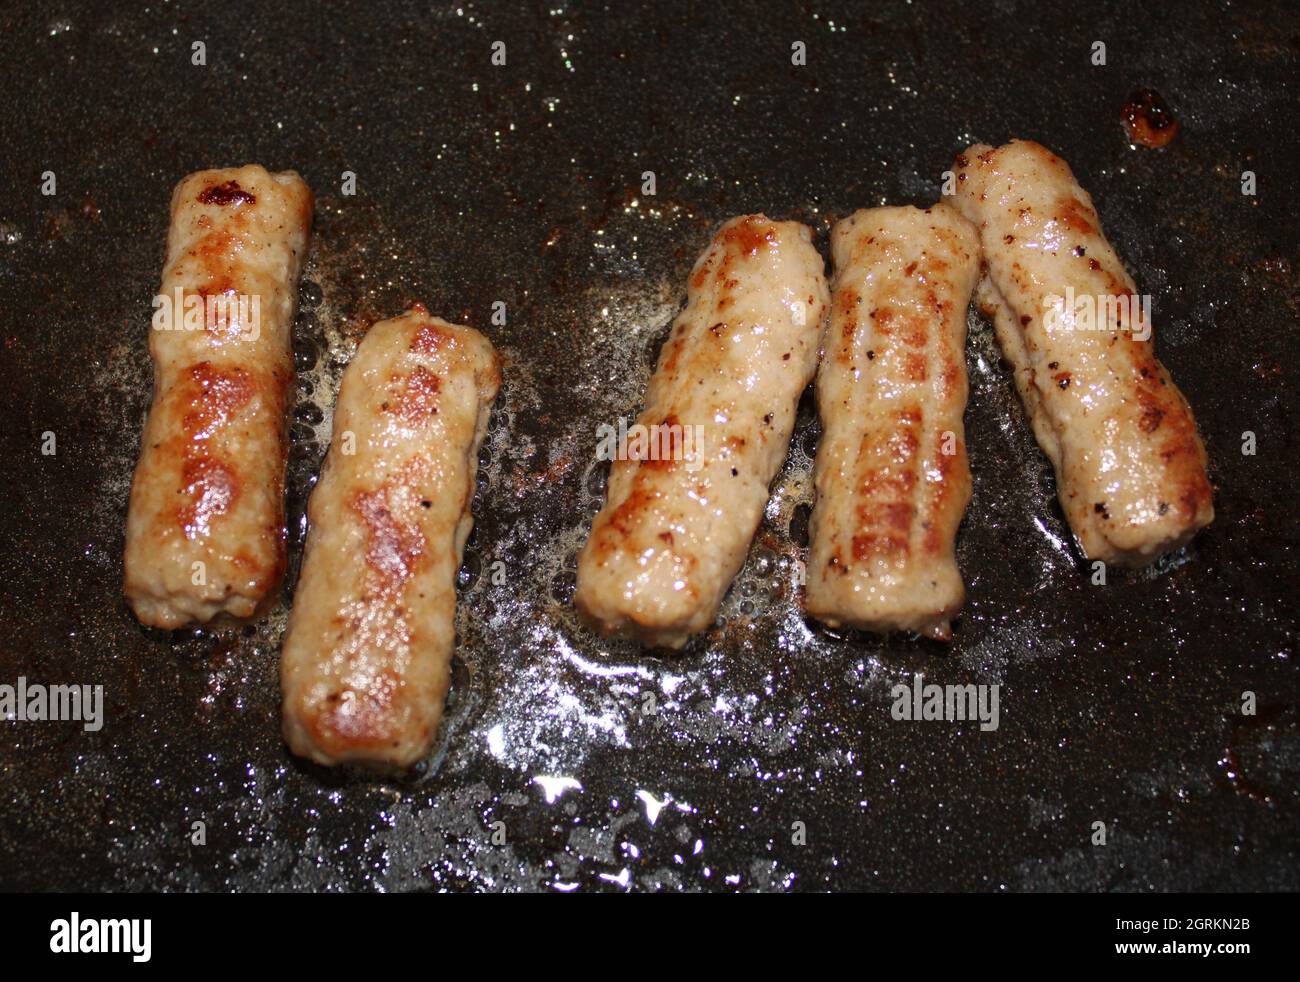 Five sausage links cooking on a griddle. Stock Photo